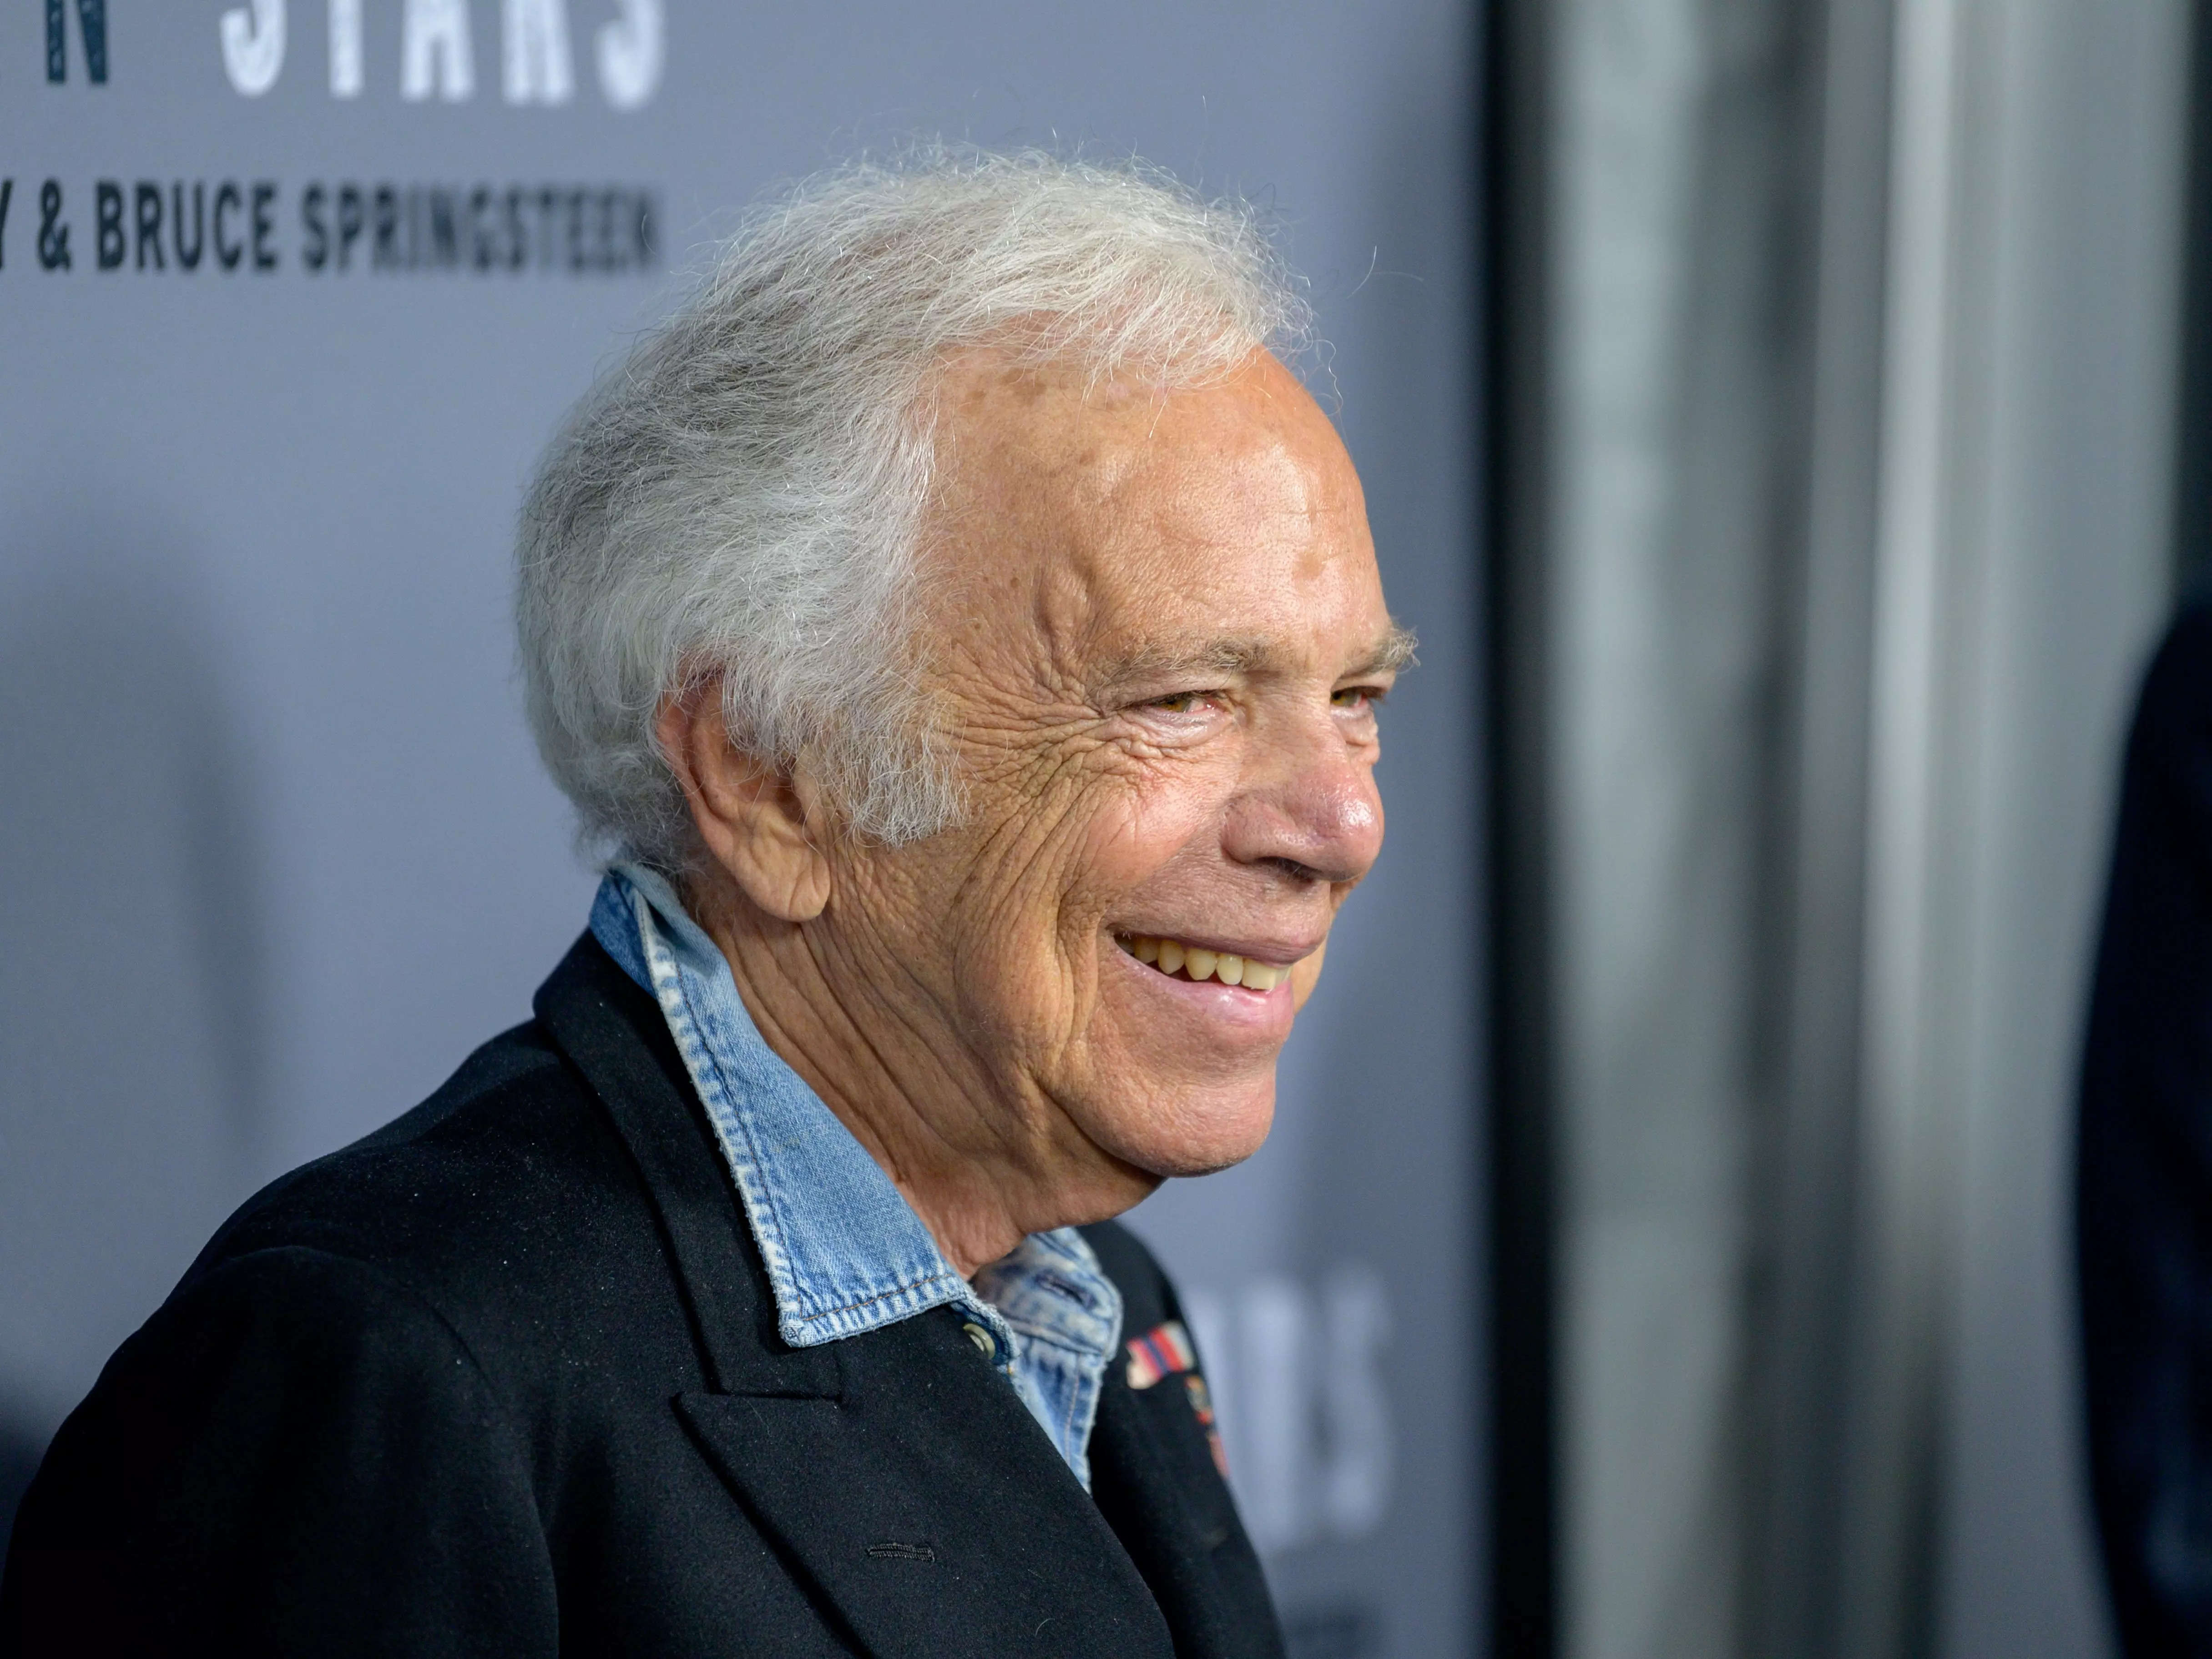 An LVMH-Ralph Lauren Acquisition Deal Is Reportedly Unlikely